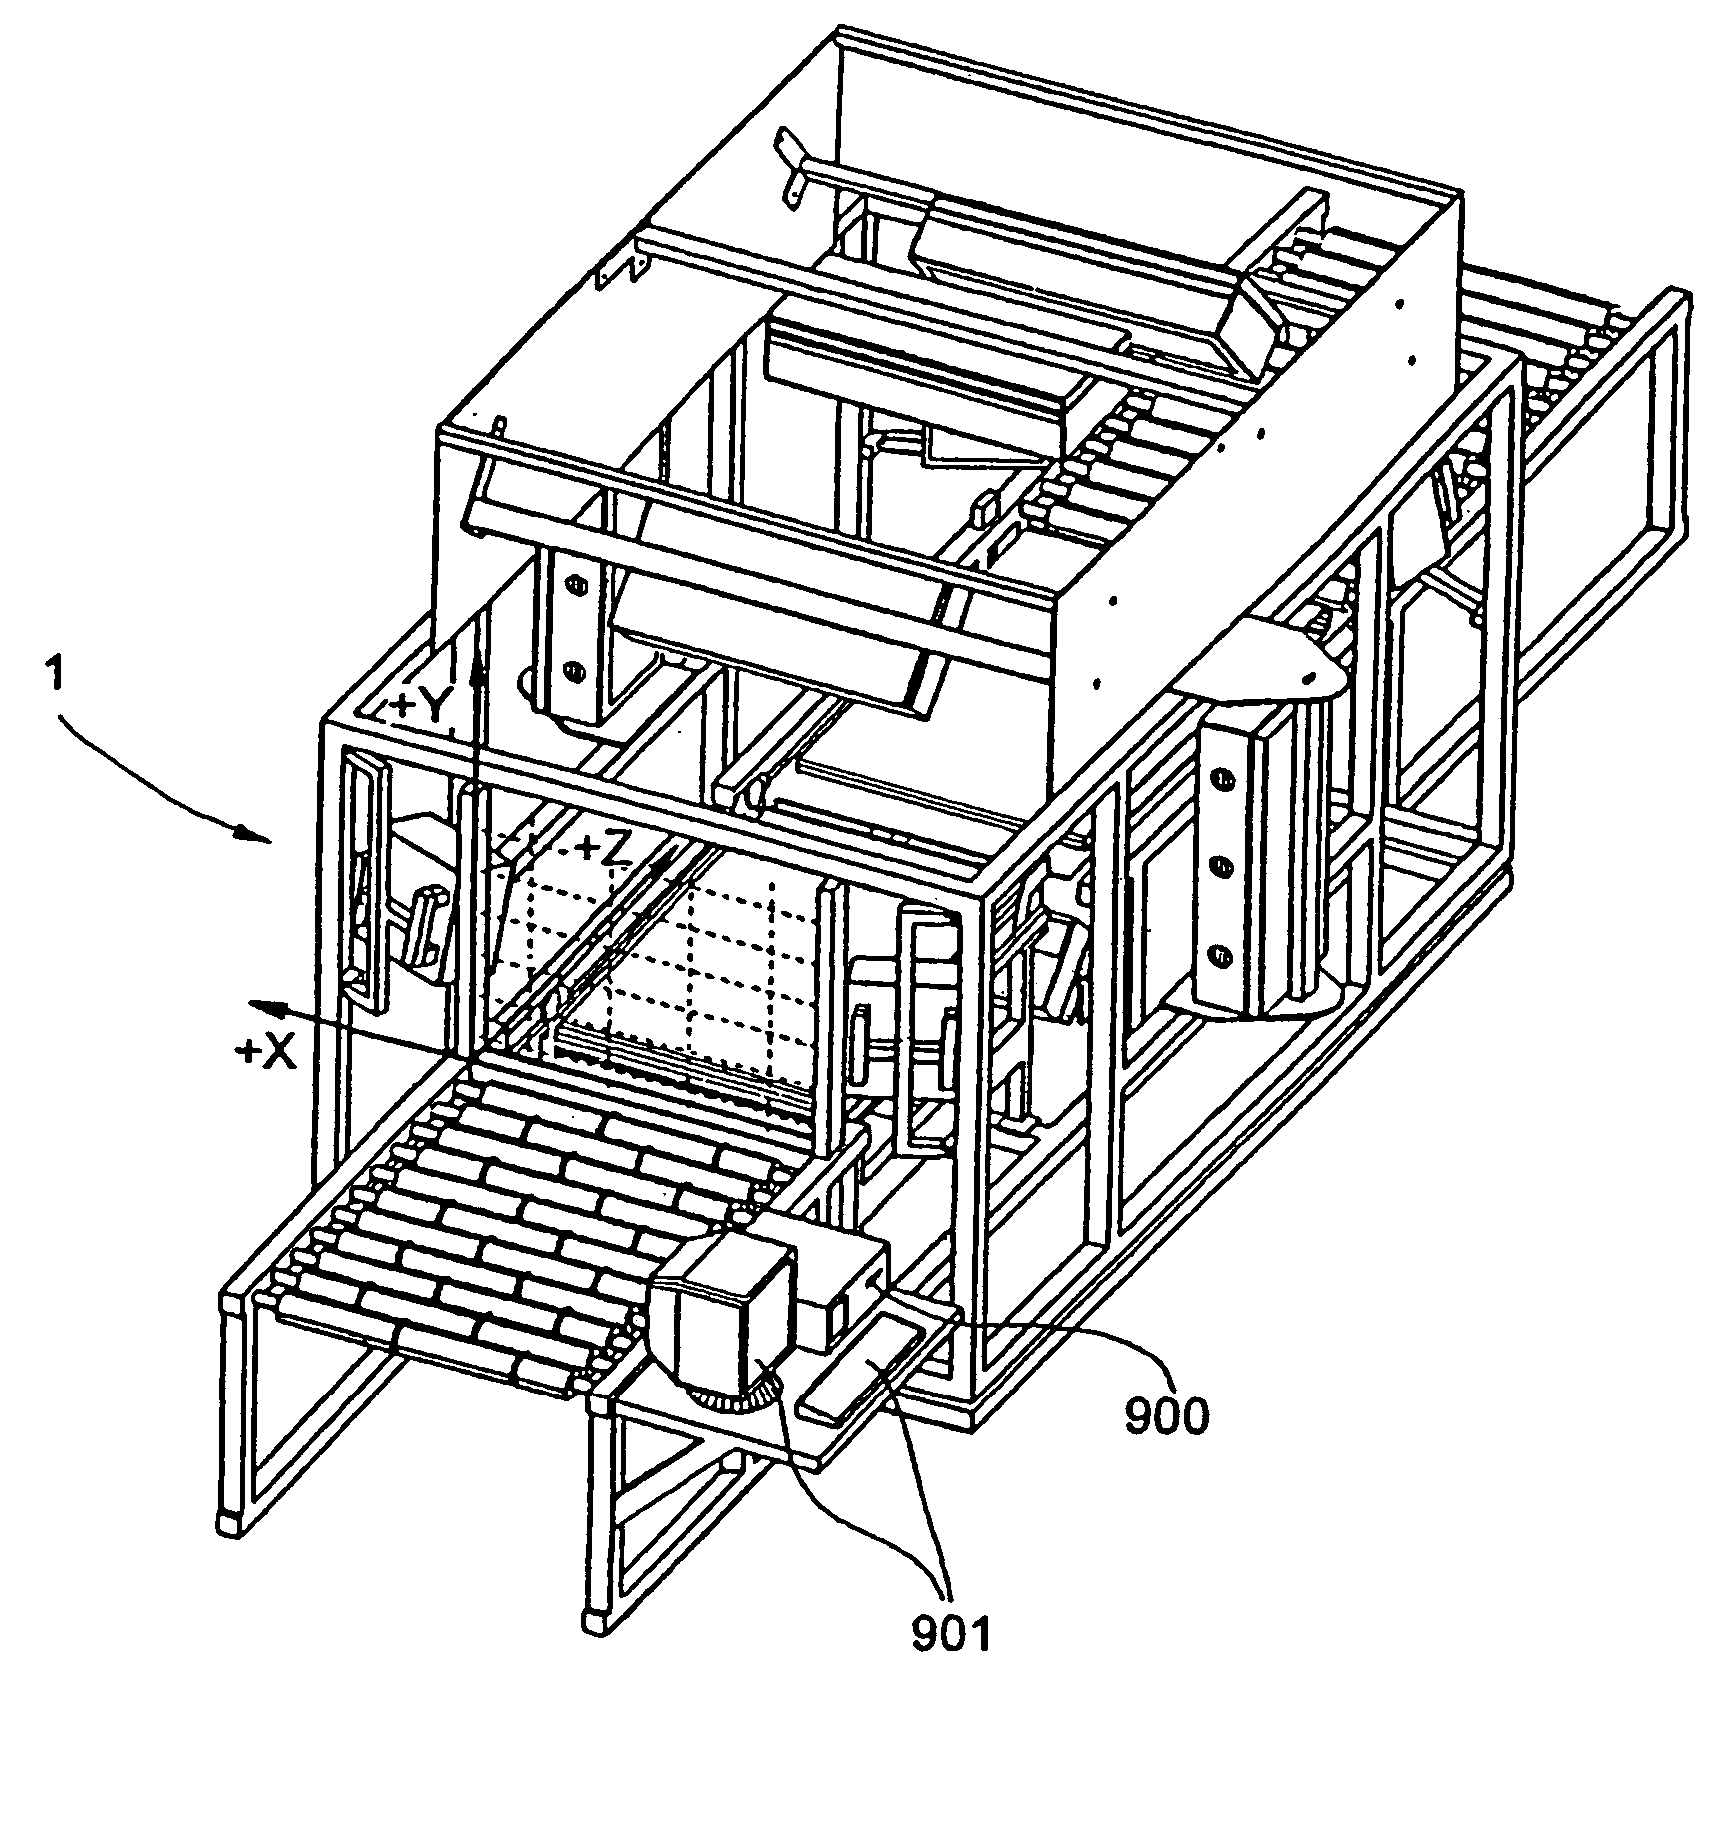 Automated method of and system for dimensioning objects over a conveyor belt structure by applying contouring tracing, vertice detection, corner point detection, and corner point reduction methods to two-dimensional range data maps of the space above the conveyor belt captured by an amplitude modulated laser scanning beam